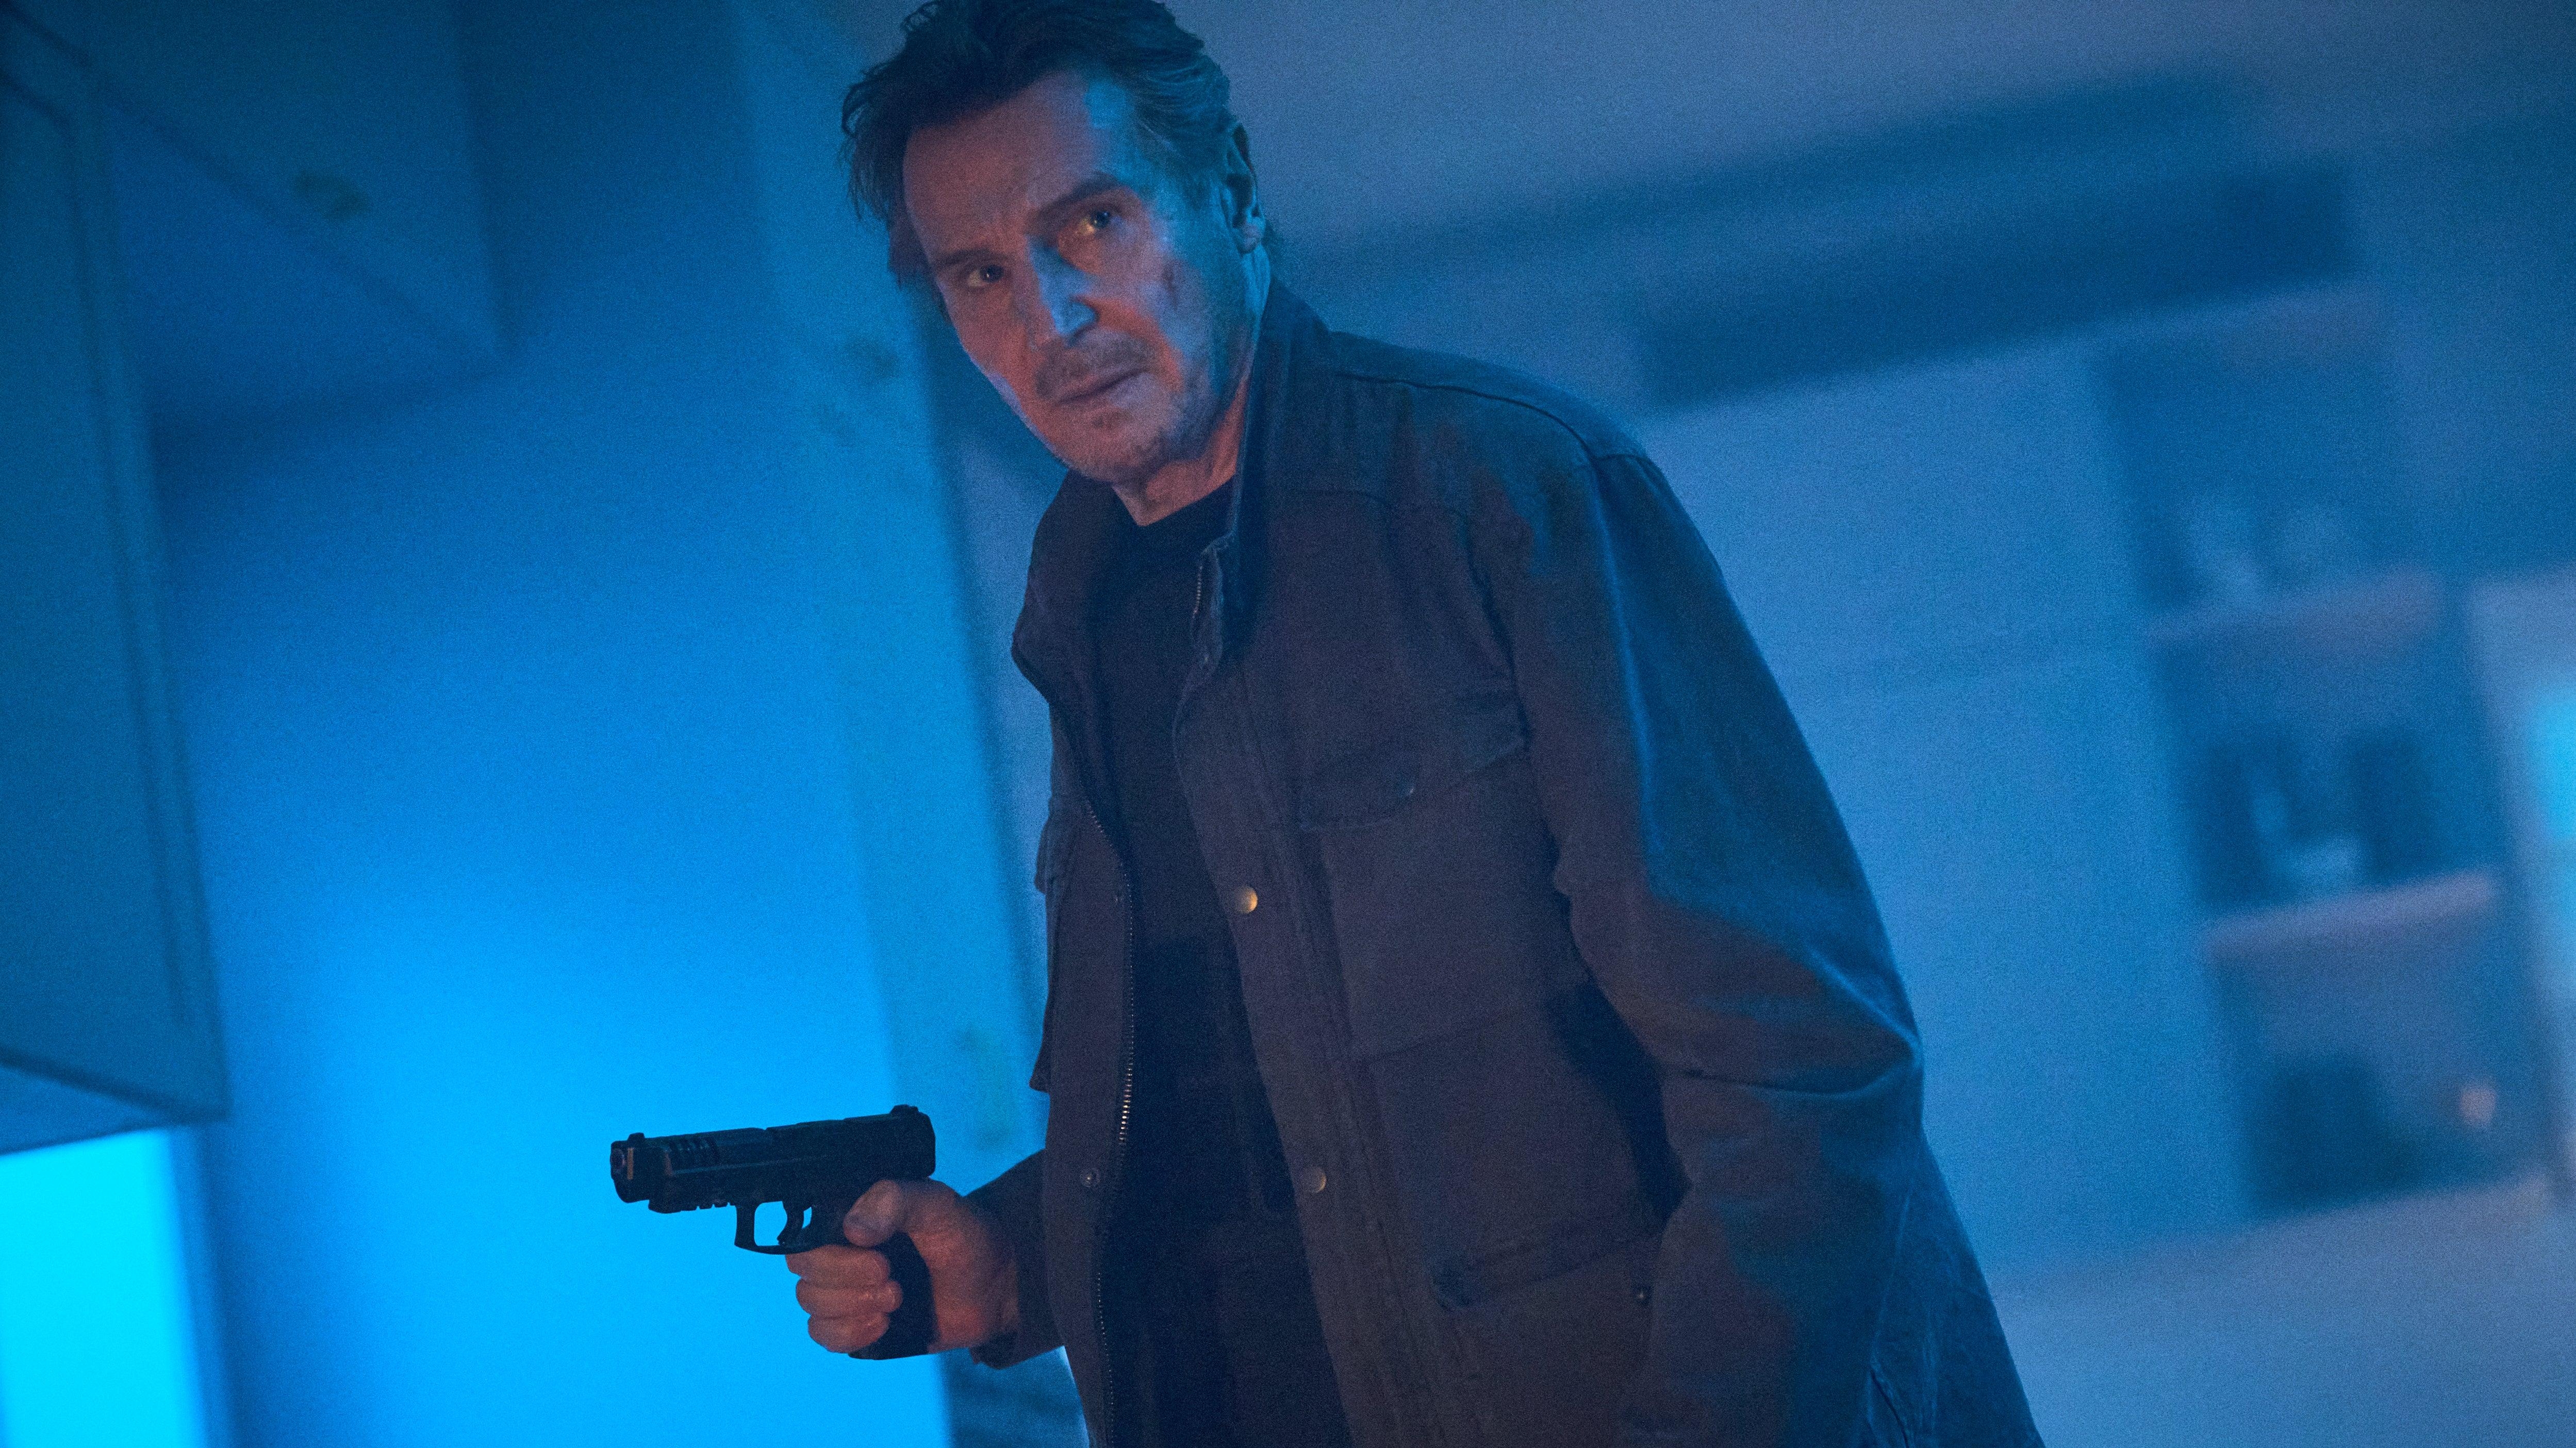 Liam Neeson’s latest action vehicle, Blacklight, is a shoddy pandemic production